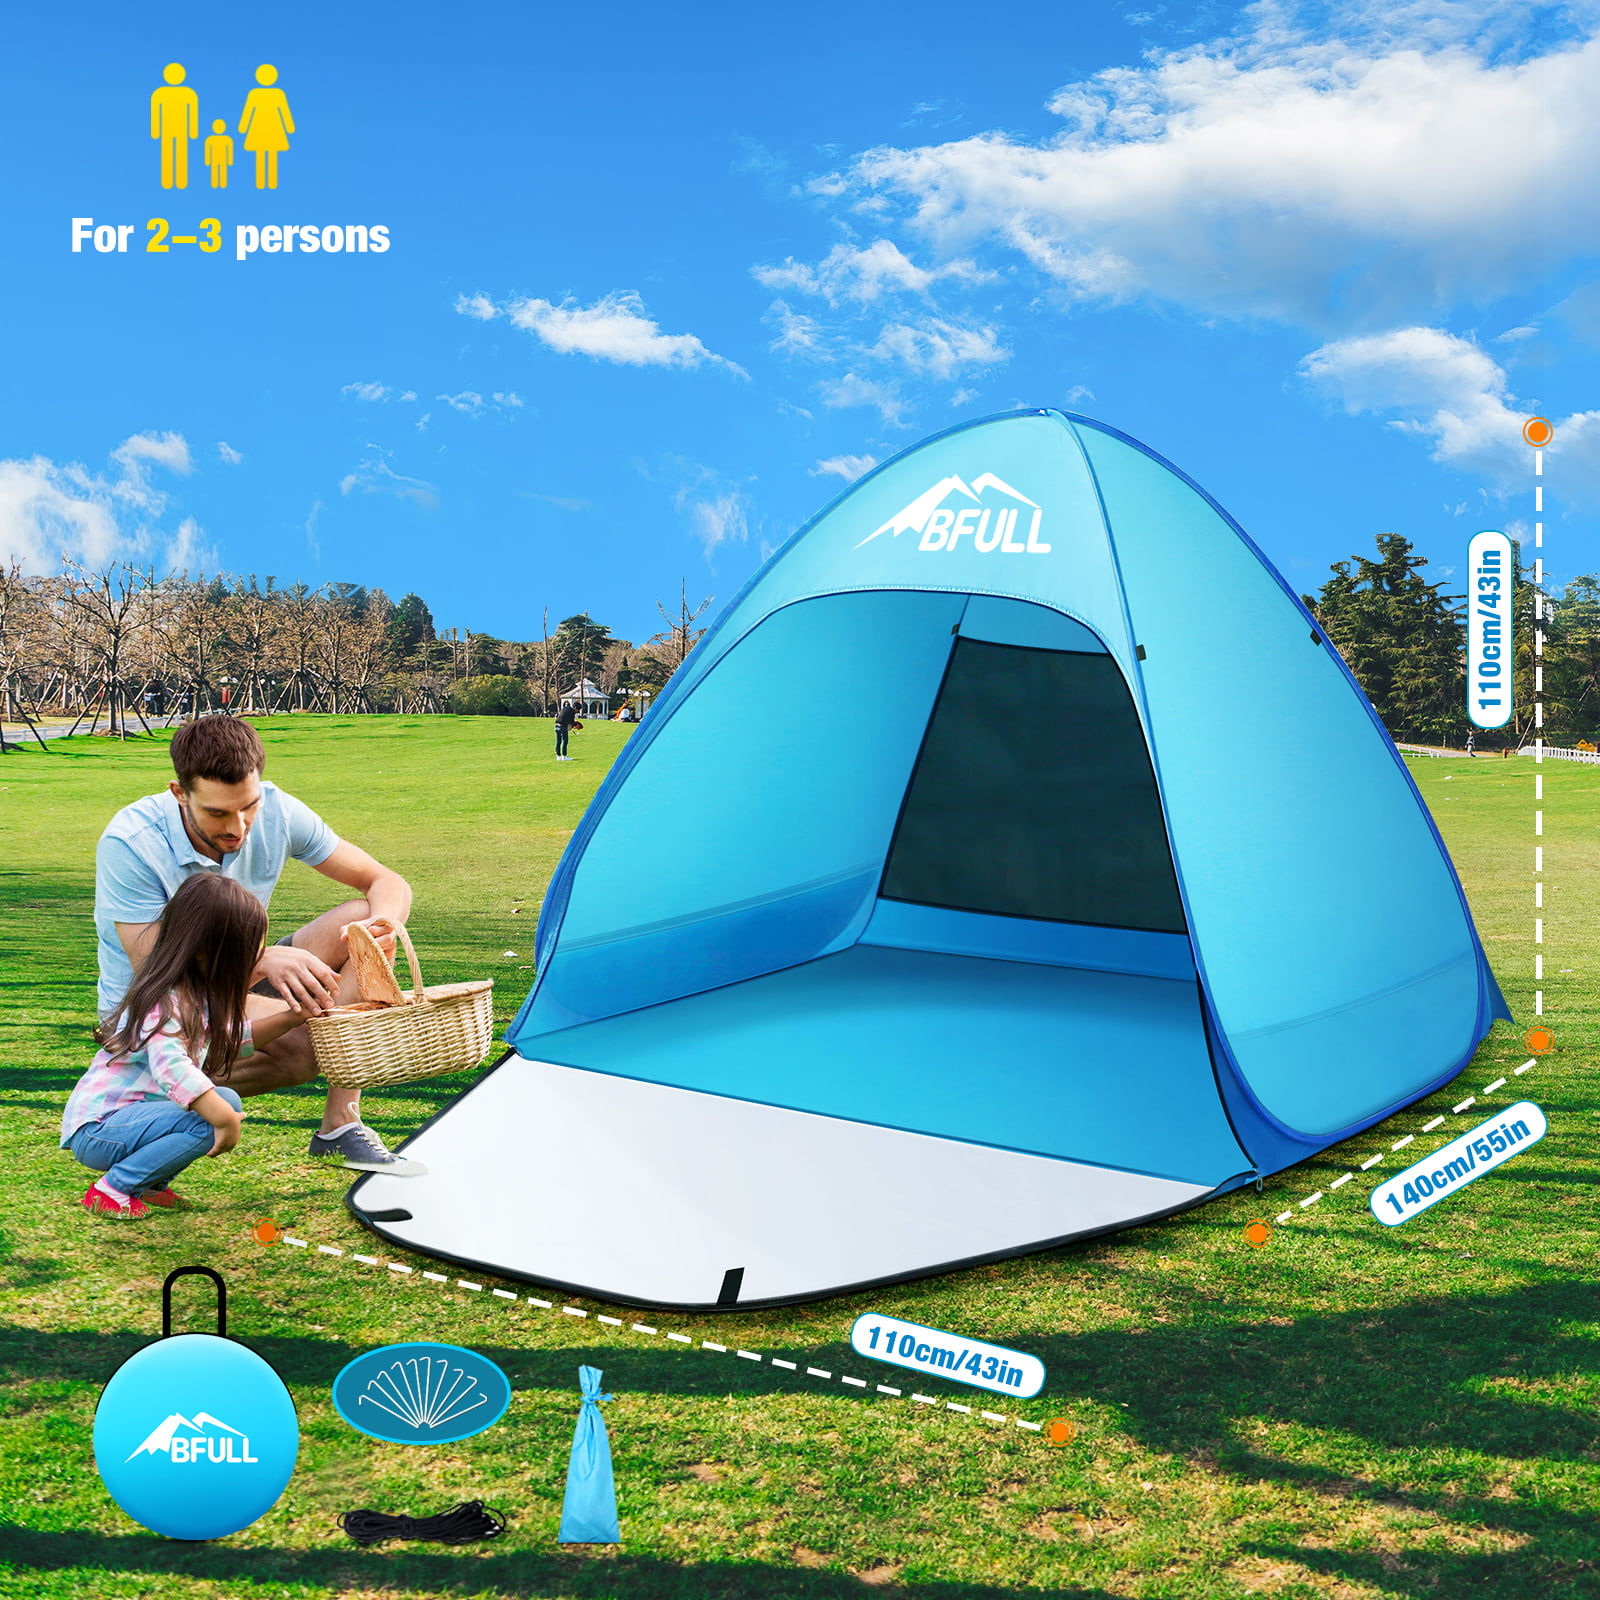 Portable Baby Canopy Beach Shelter Pop Up Tent for 2-3 People Fishing Picnic Beach Rated UPF 50+ for UV Sun Protection Automatic Instant Pop Up Waterproof Sun Shade for Family Camping